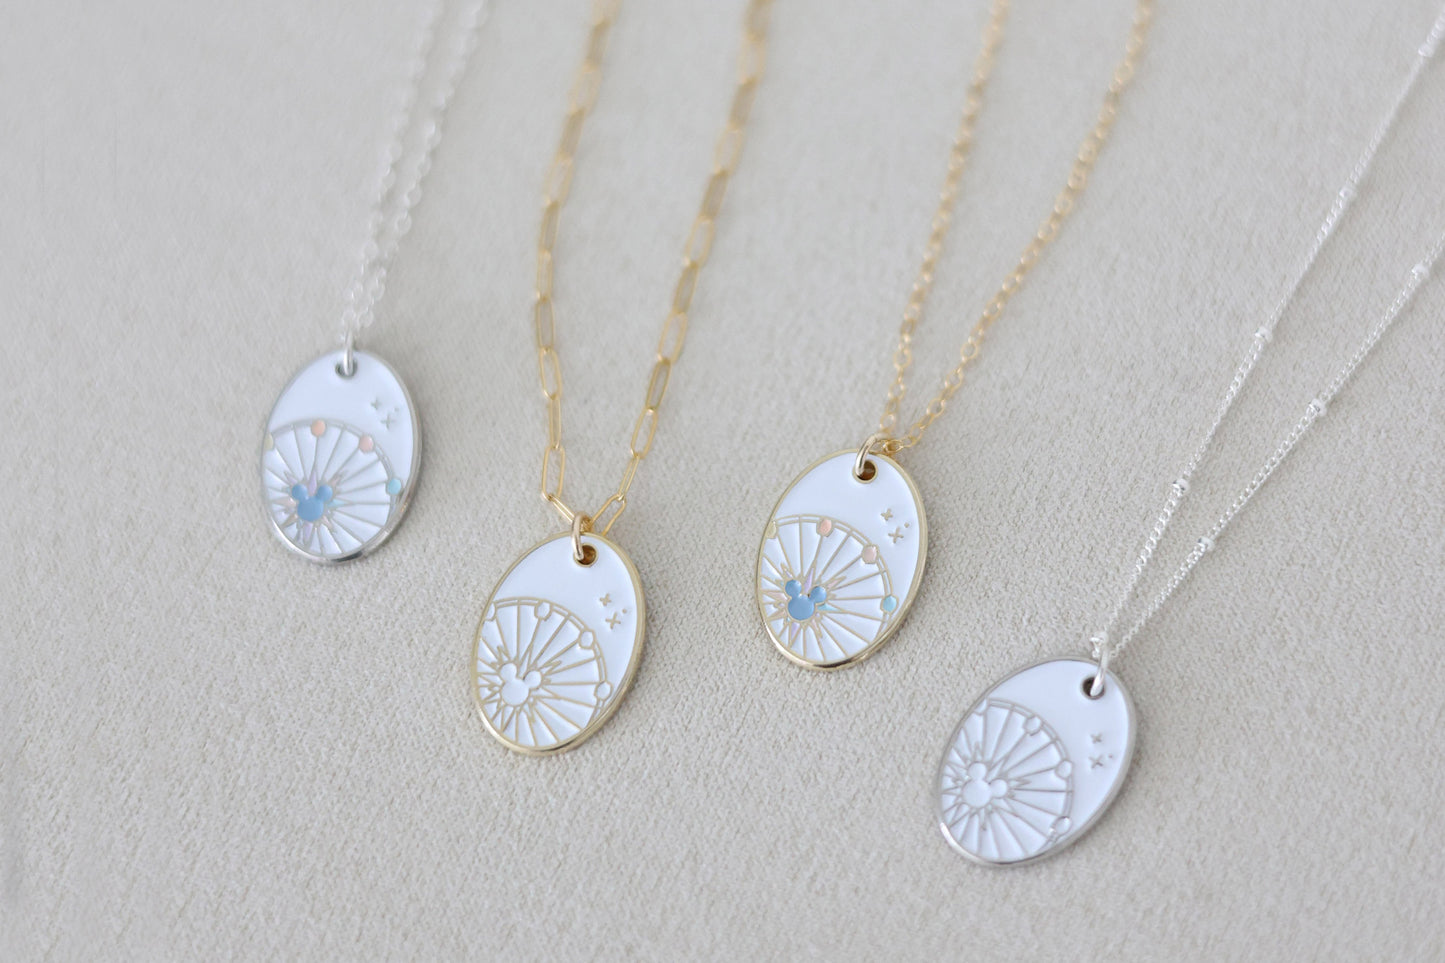 Pixie Dust Collection - Fun Wheel Necklace